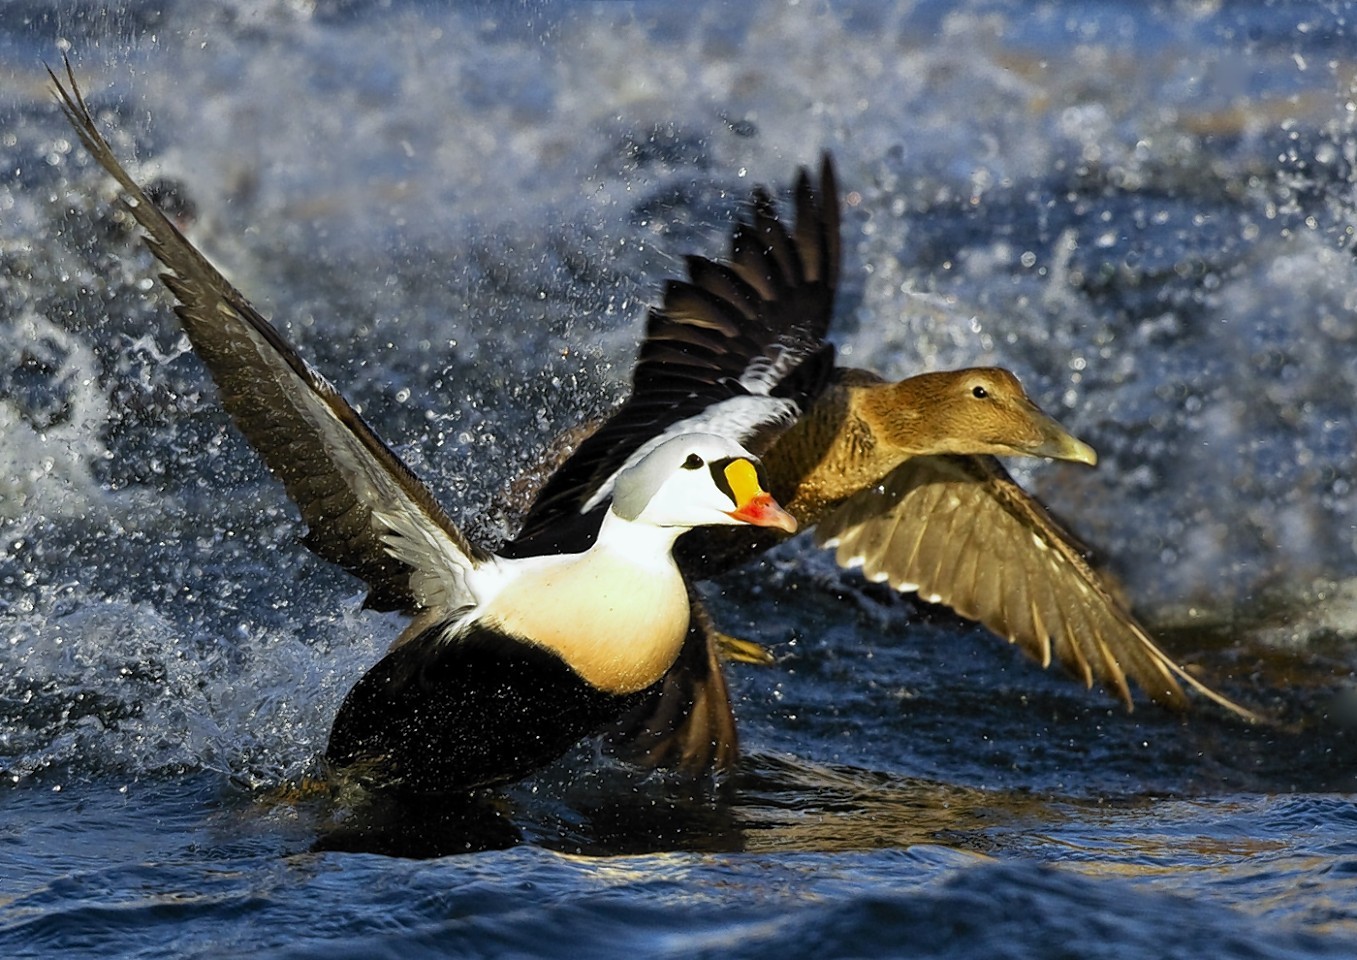 The King Eider is only spotted in the UK a handful of times each year